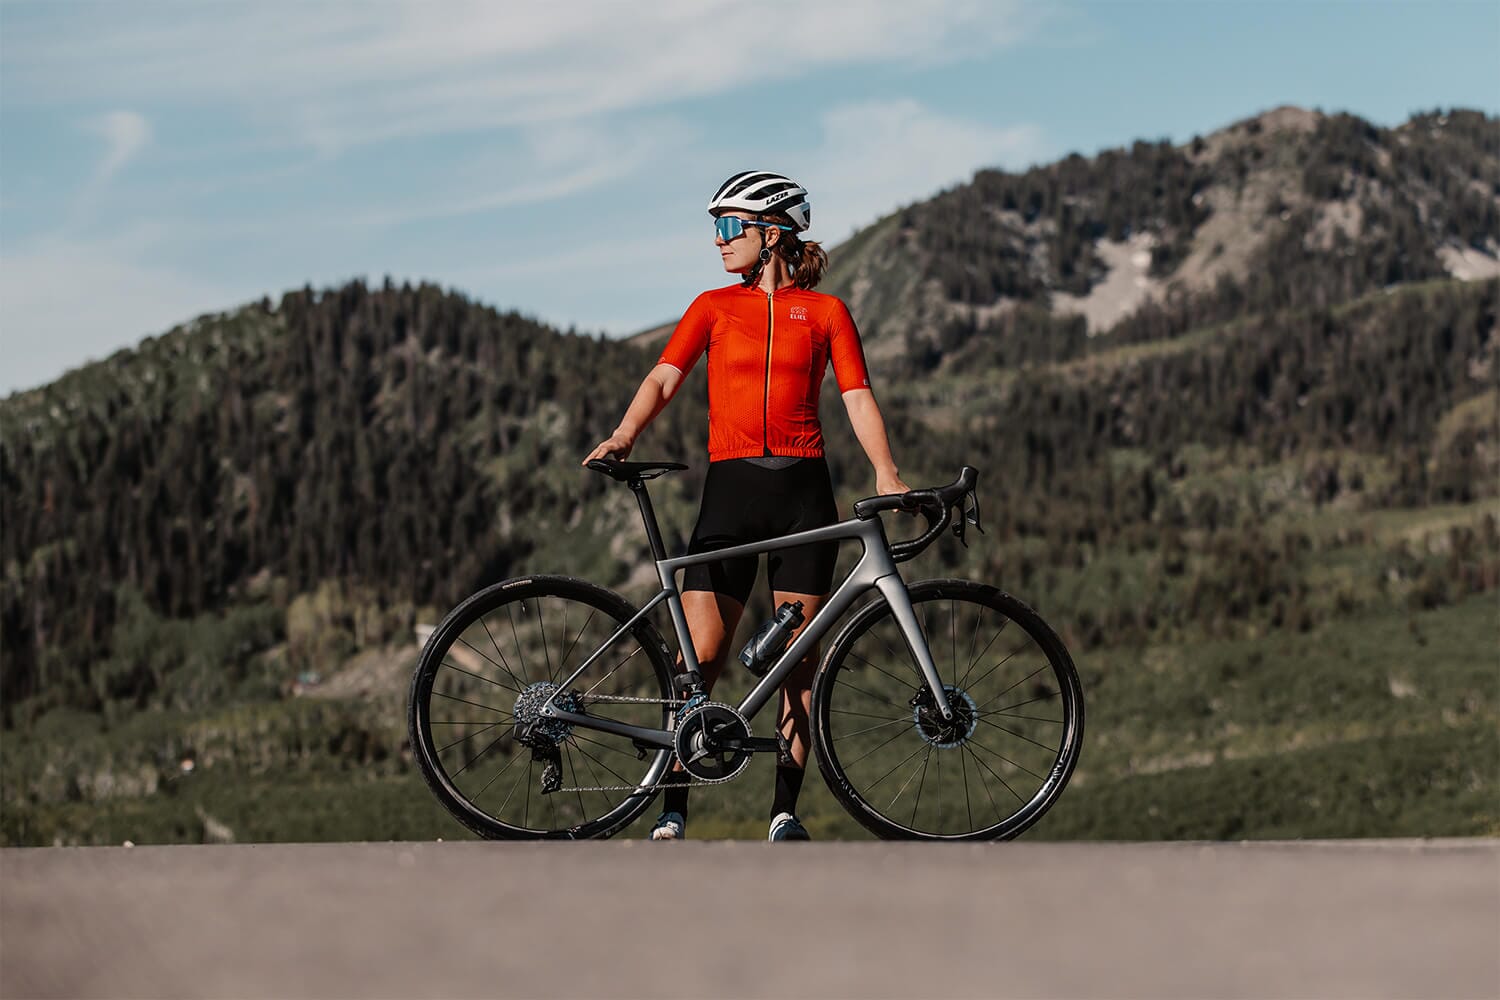 The ENVE Melee Is The Brand's First Production Road Bike